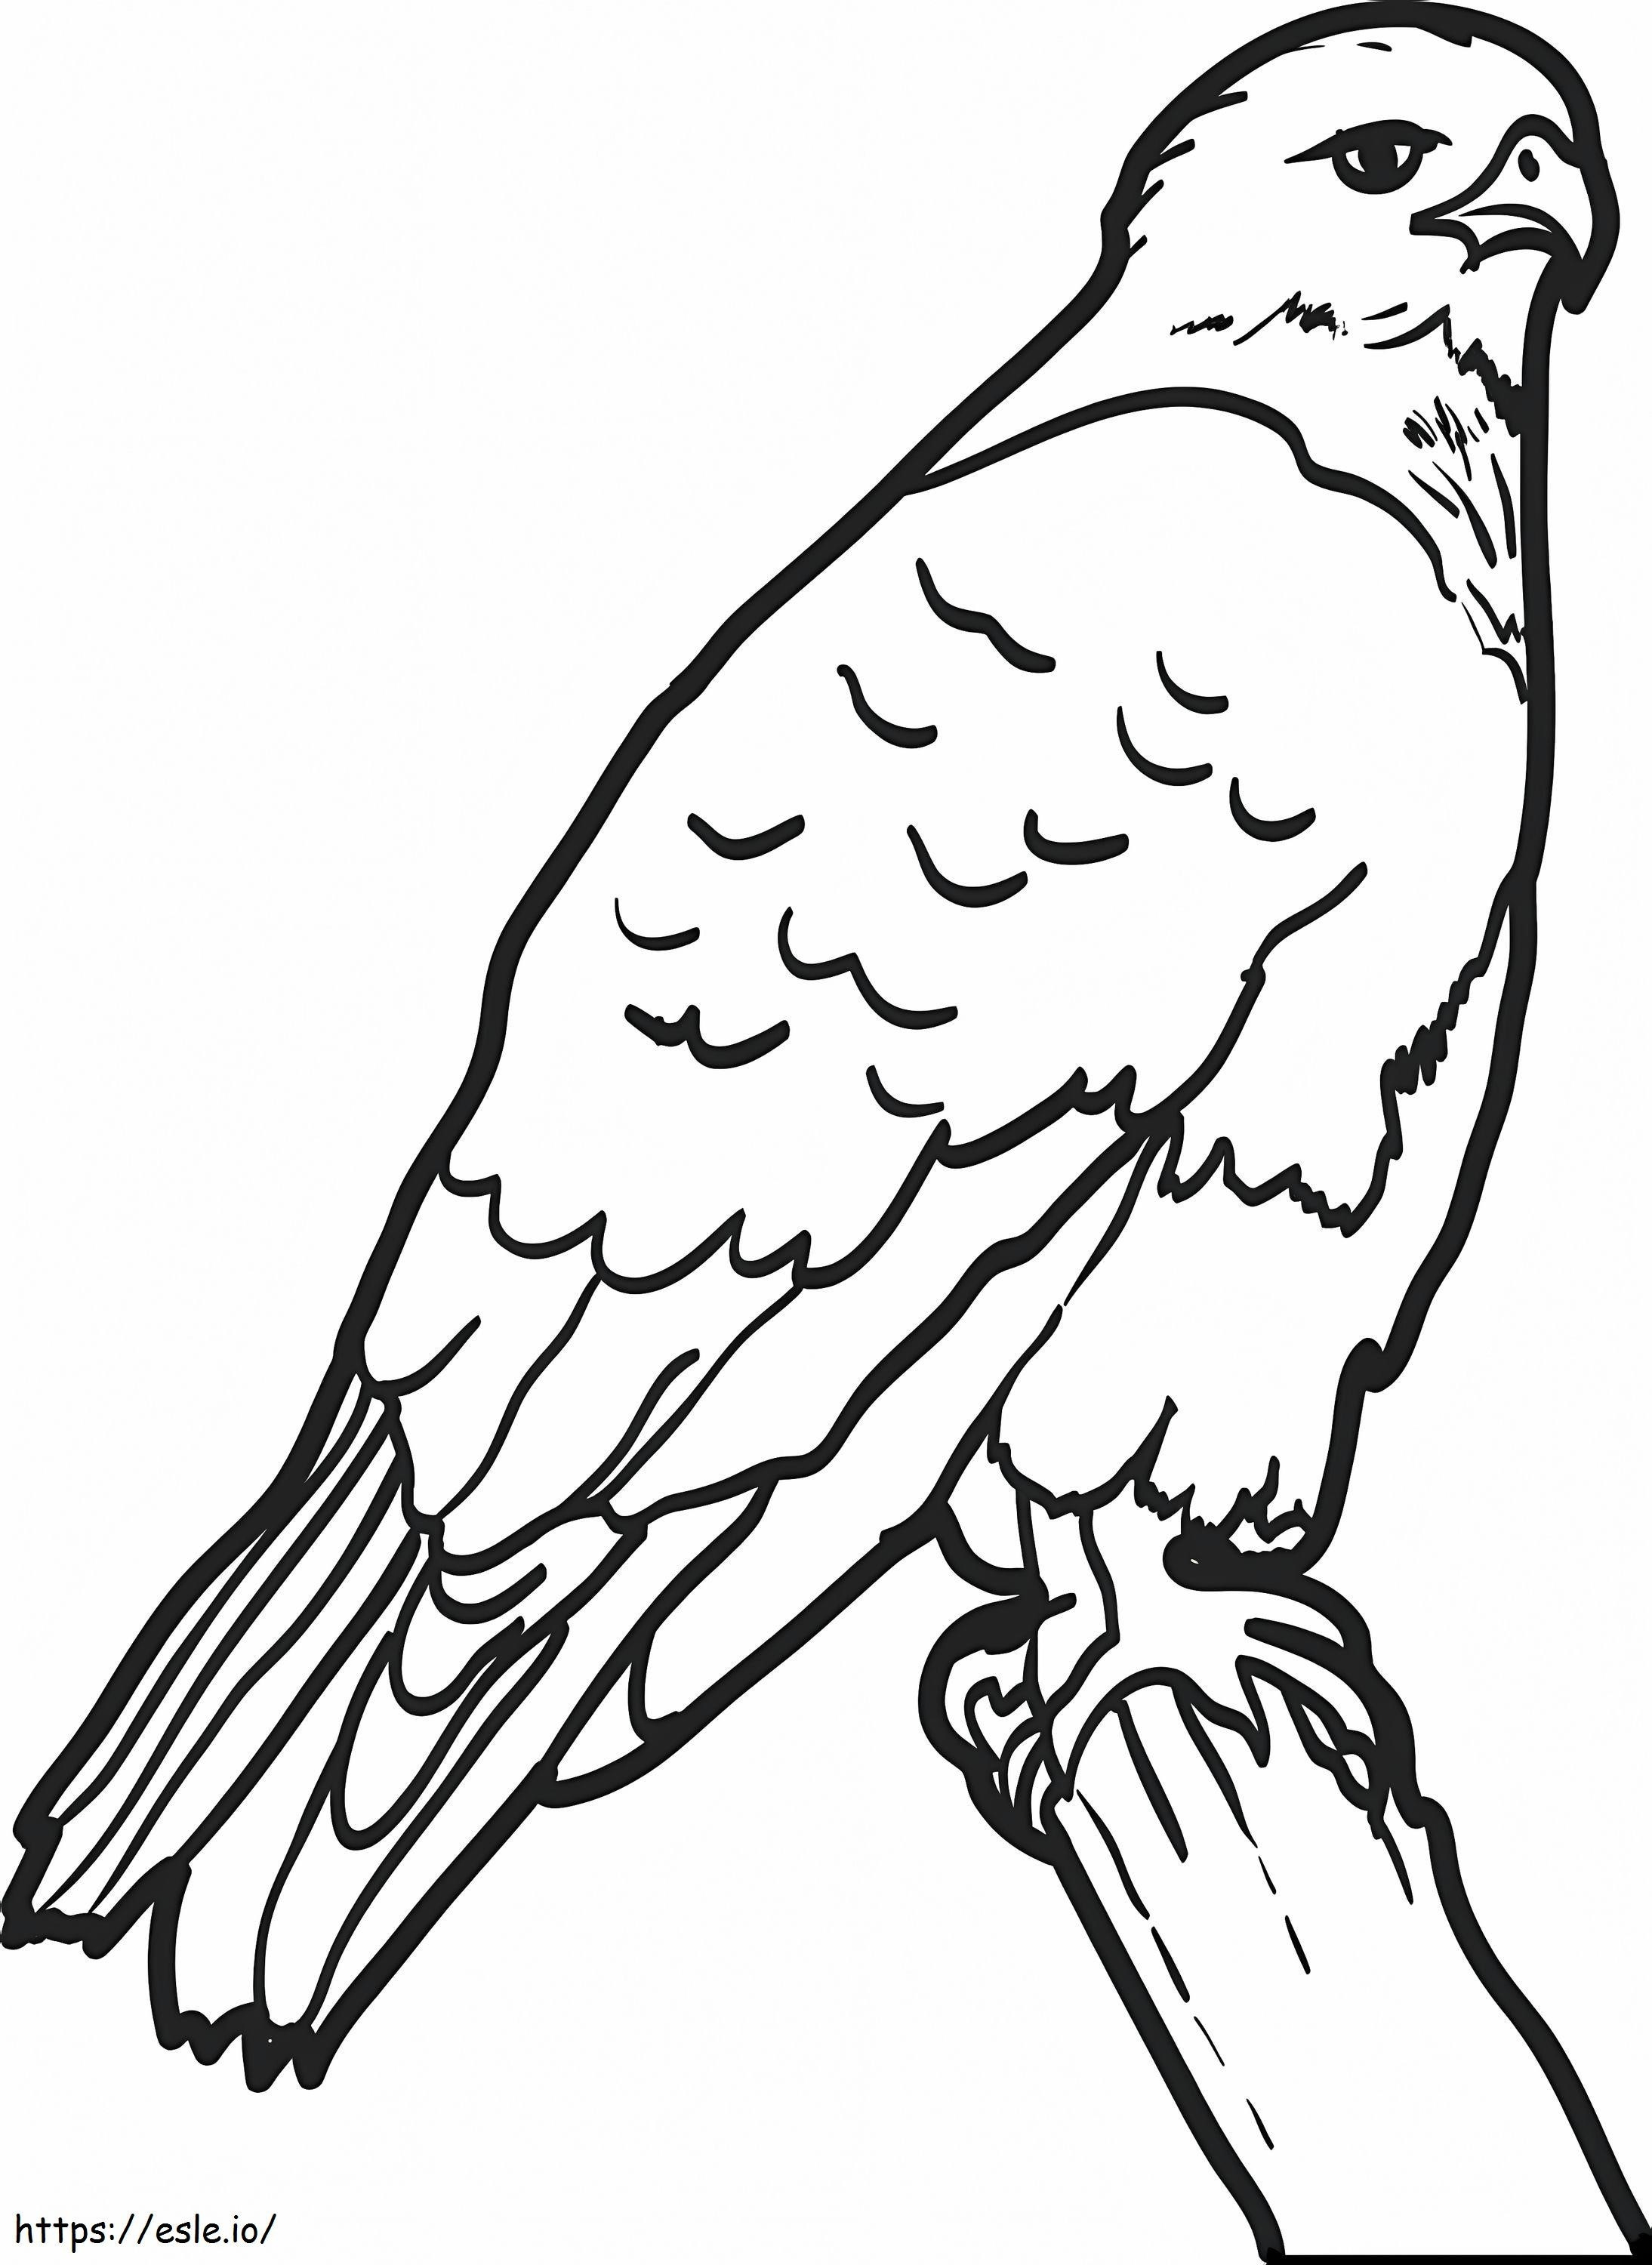 Hawk On A Branch coloring page